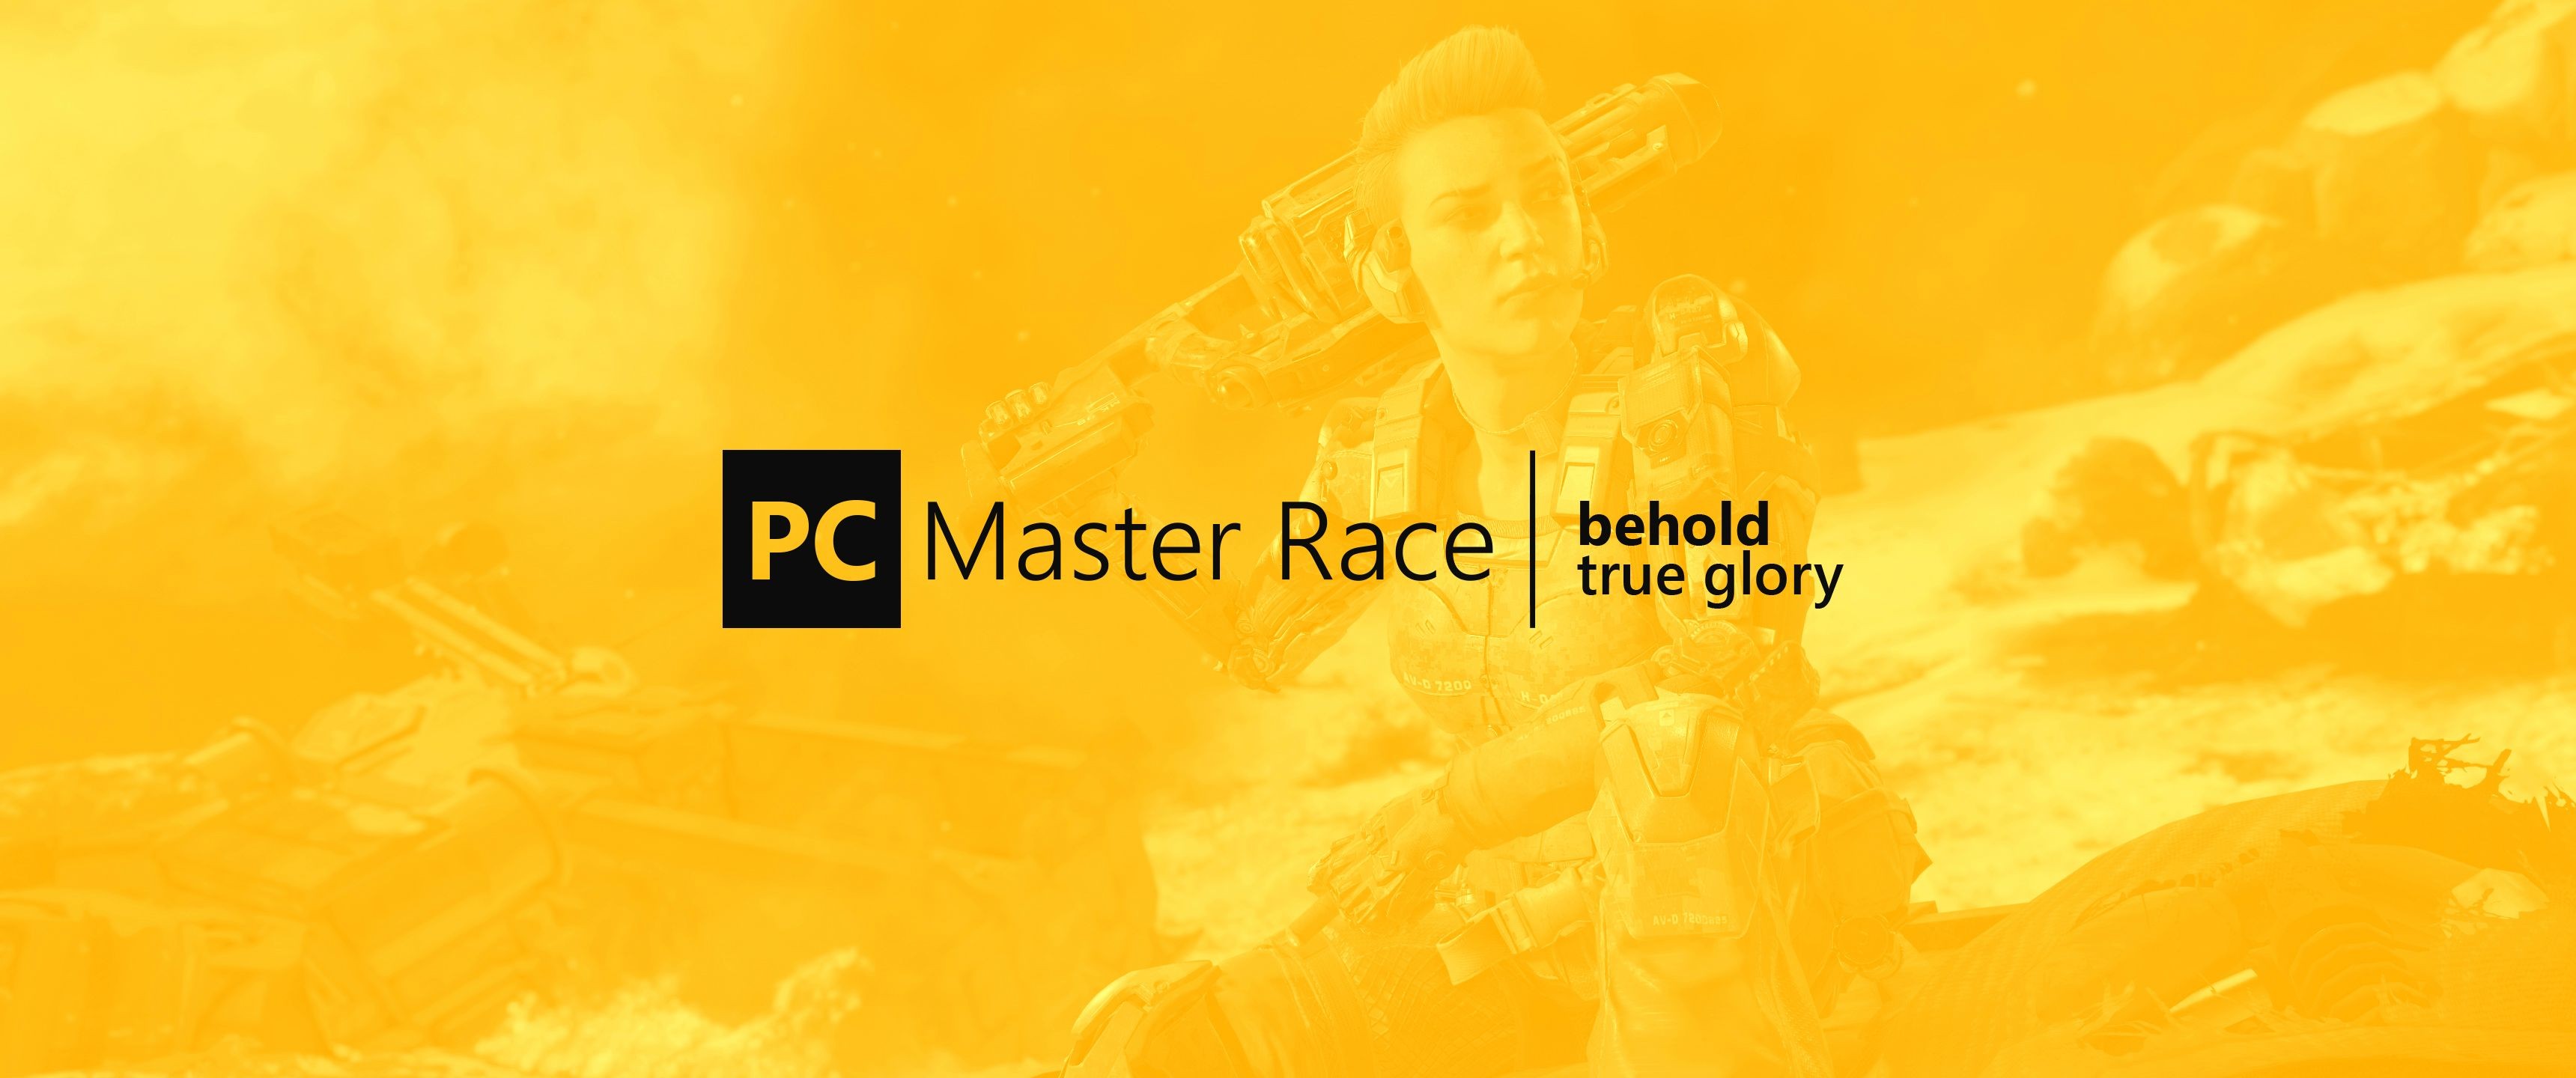 PC Gaming PC Master Race Yellow Background 3440x1440